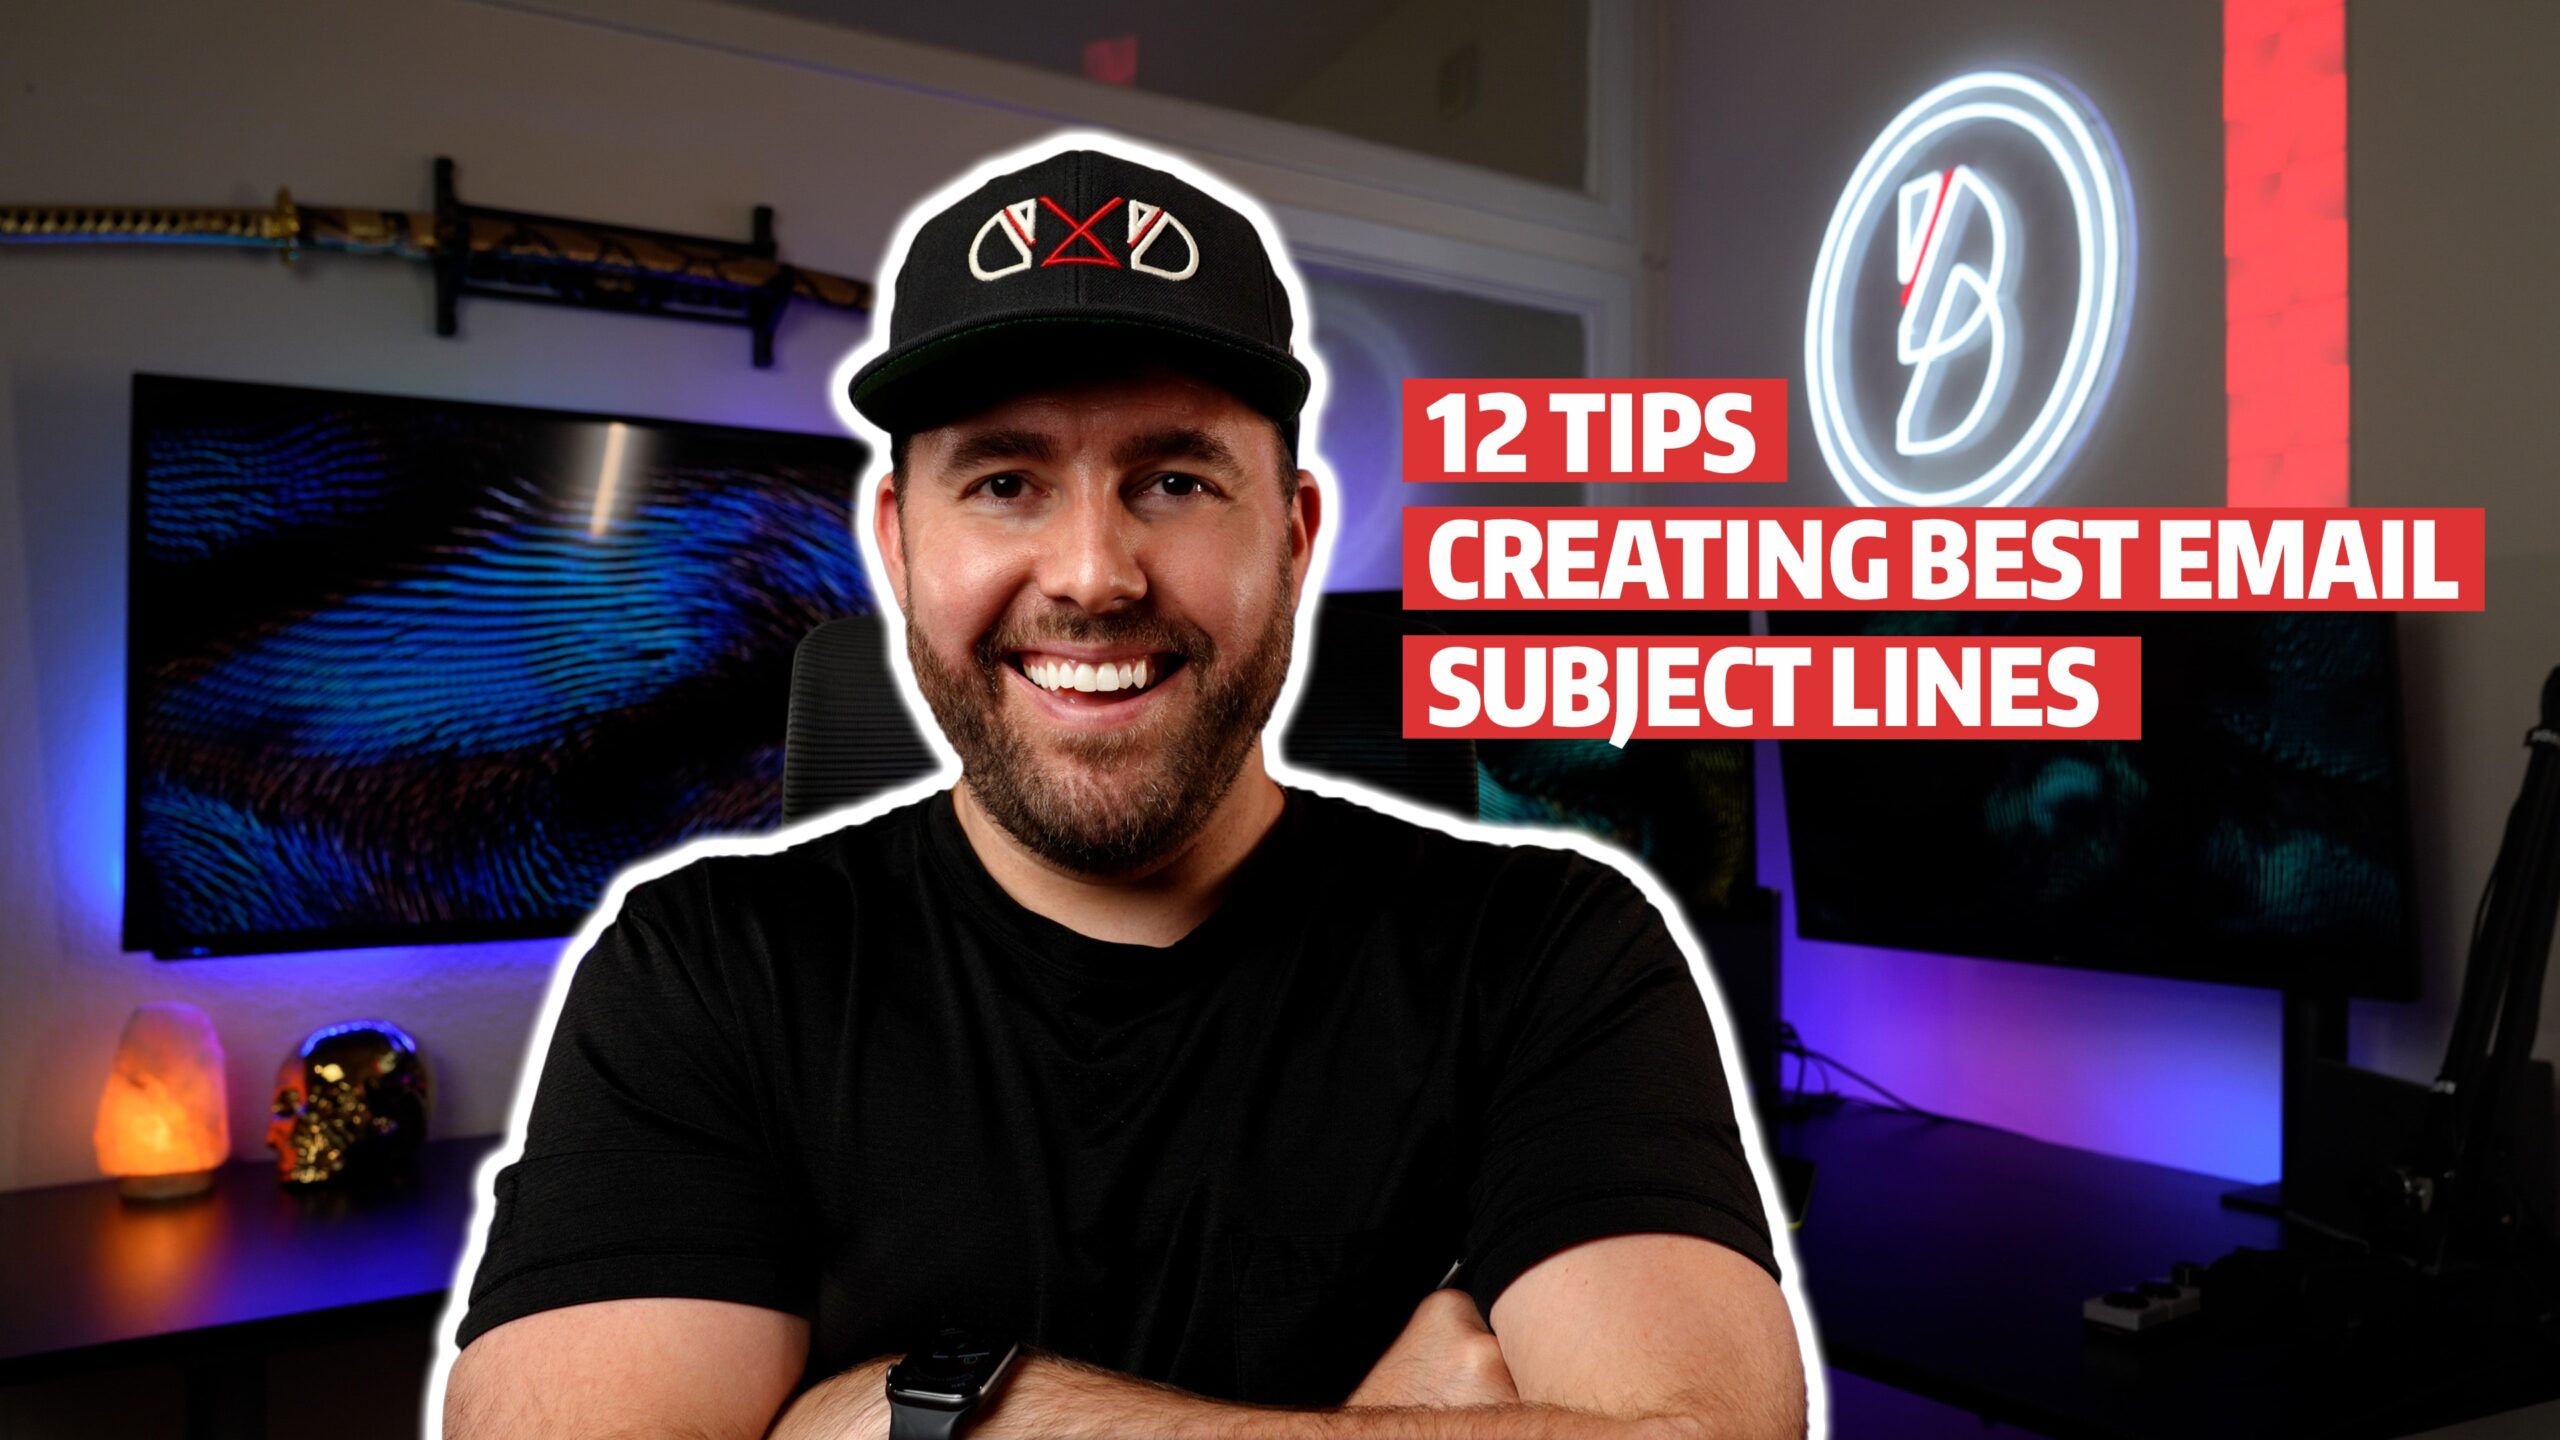 12 Tips For Creating The Best Email Subject Lines